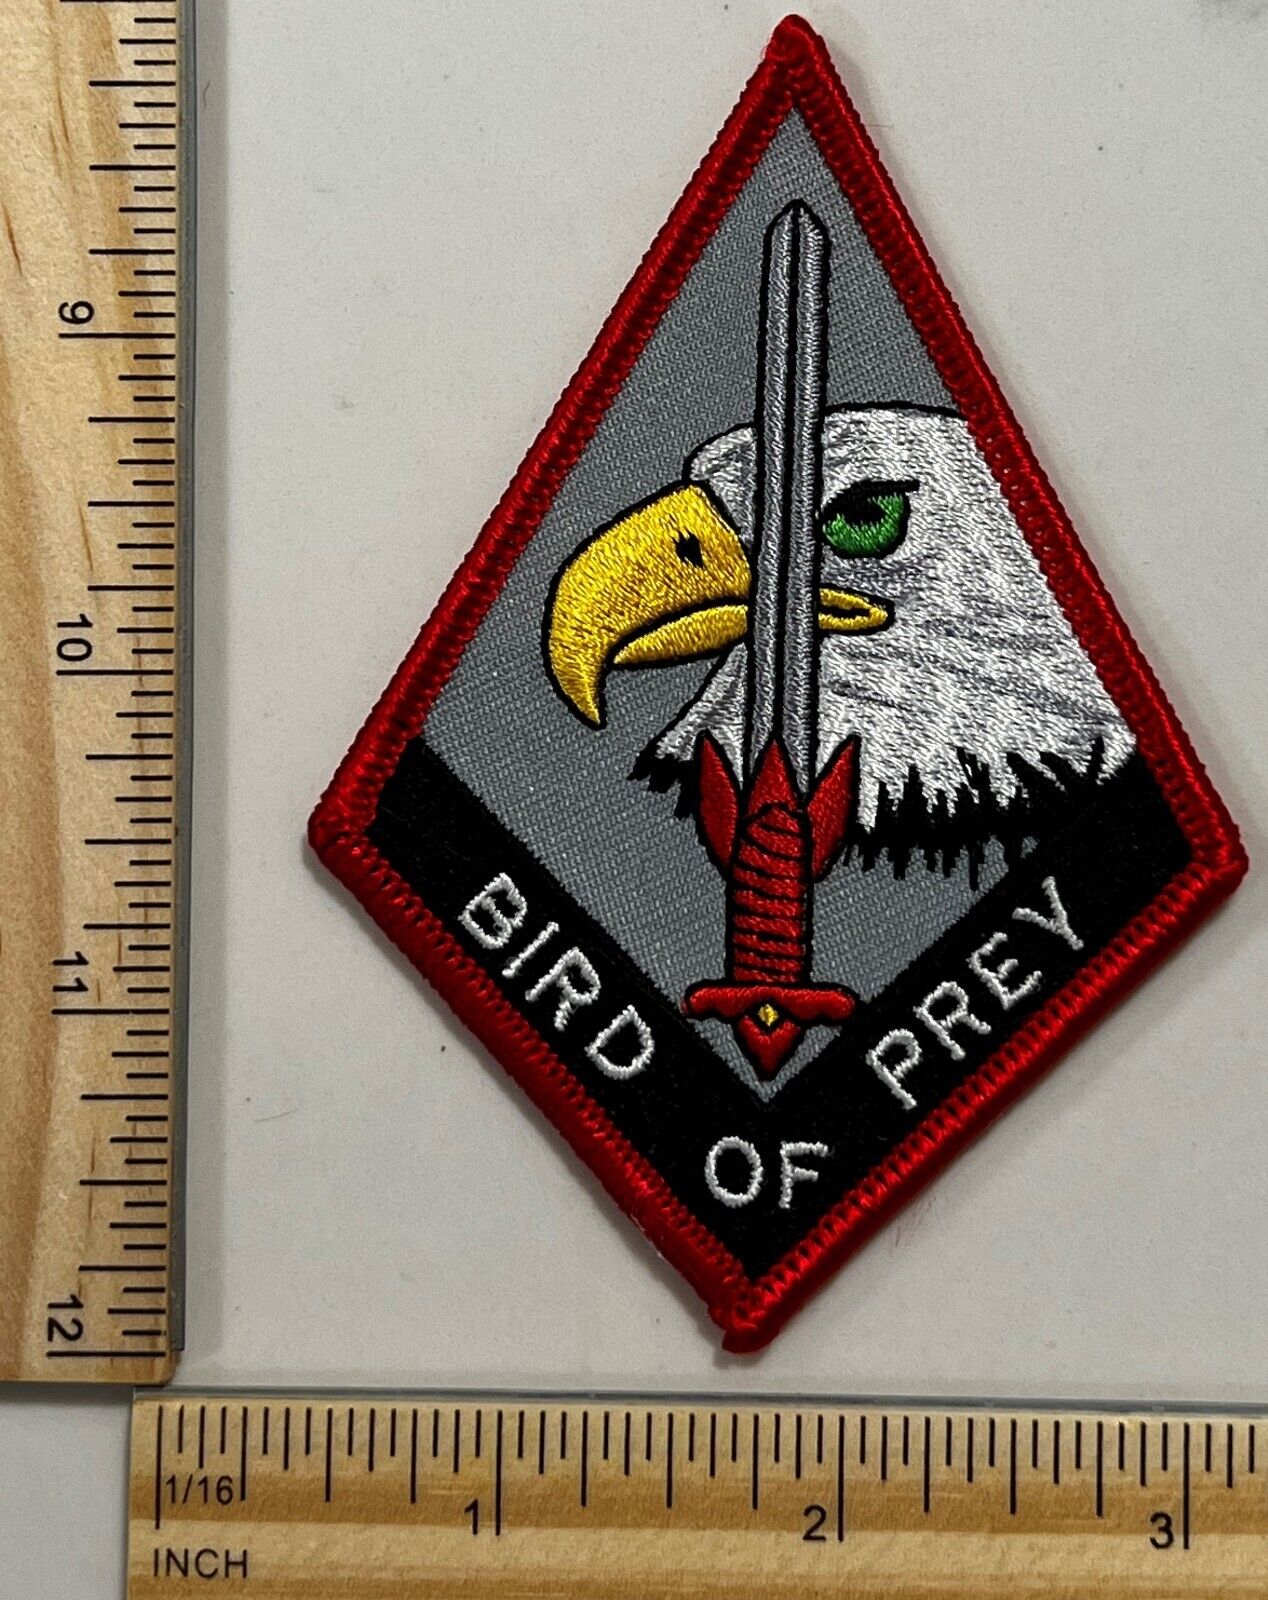 RARE - BLACK OPS MILITARY PATCH – HIGHLY CLASSIFIED BIRD OF PREY - GROOM LAKE